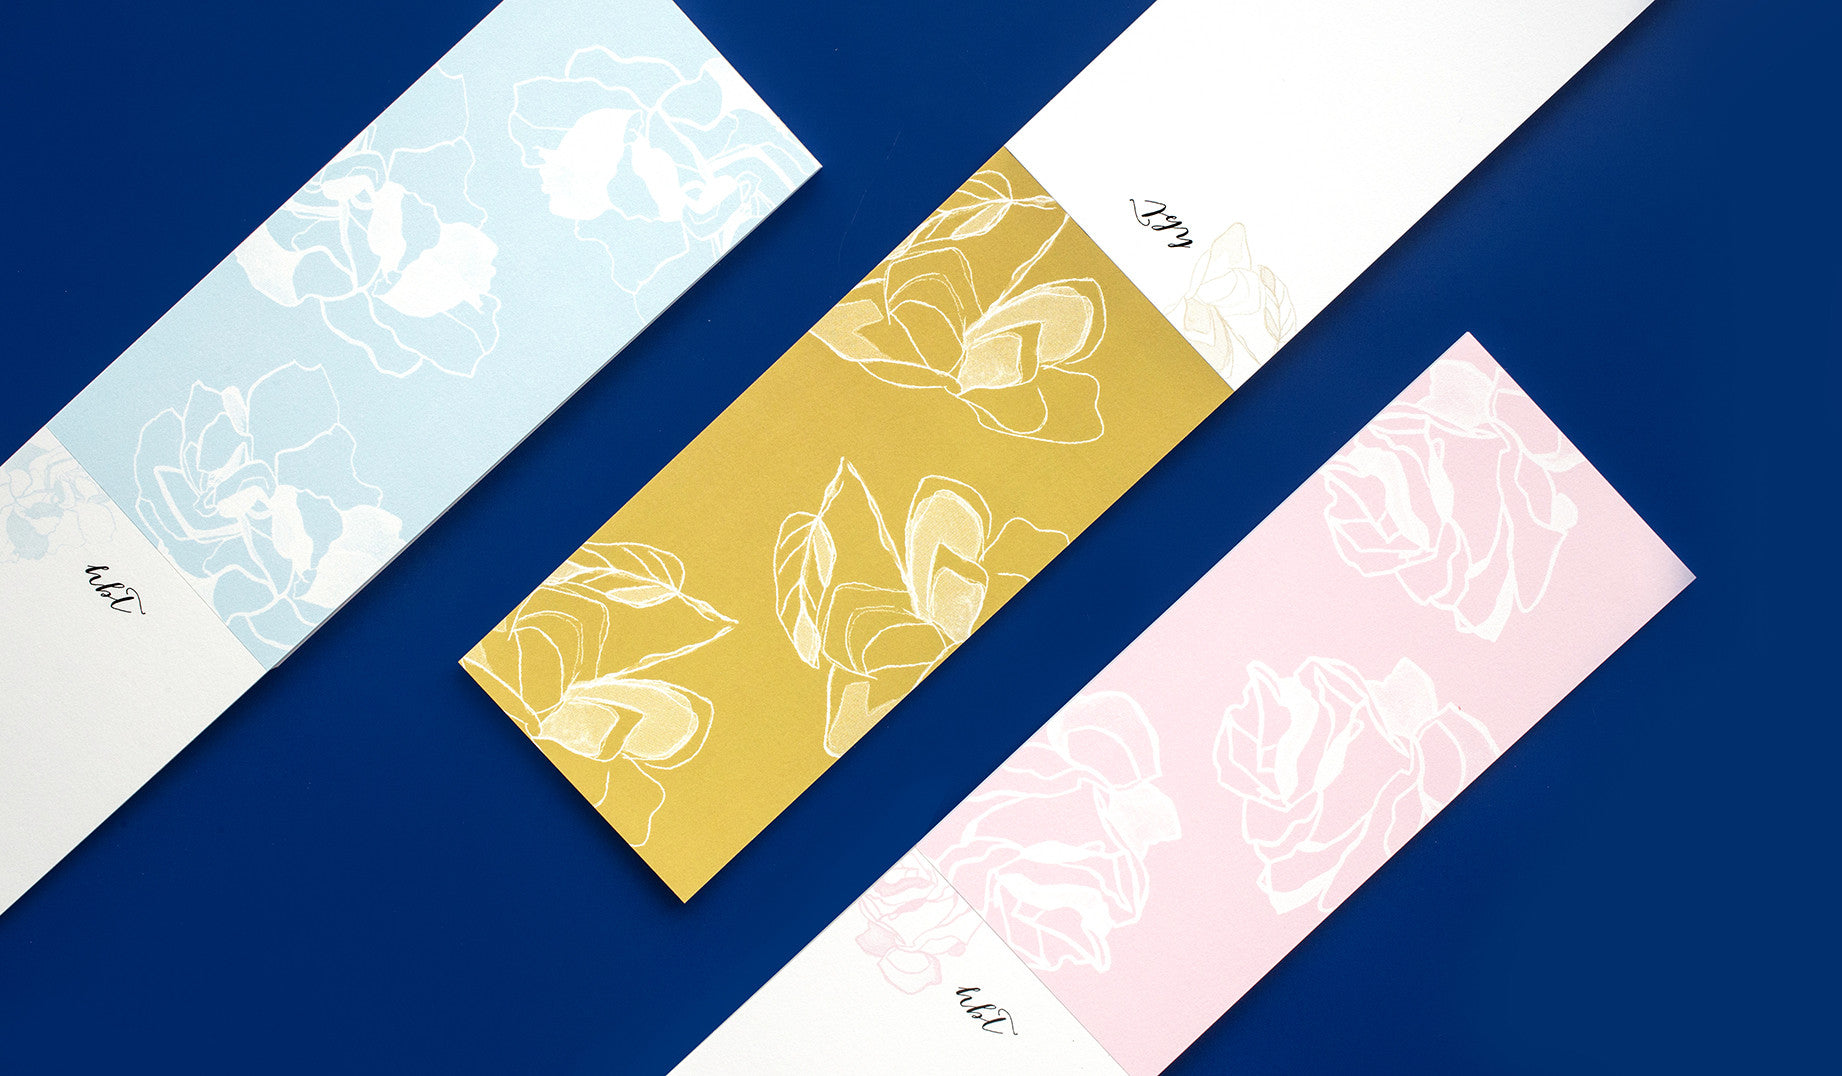 Utilizing the classic buckslip format, Heather Taylor Home brings artistry to this practical stationery item. With three hand drawn floral patterns in this season's signature colors; turmeric, pale blue, and dusty rose, these buckslips function perfectly as your canvas for notes, lists, or sketches. Personalize these with your own monogram and location. Thirty six buckslips on premium eco-friendly papers per pad.